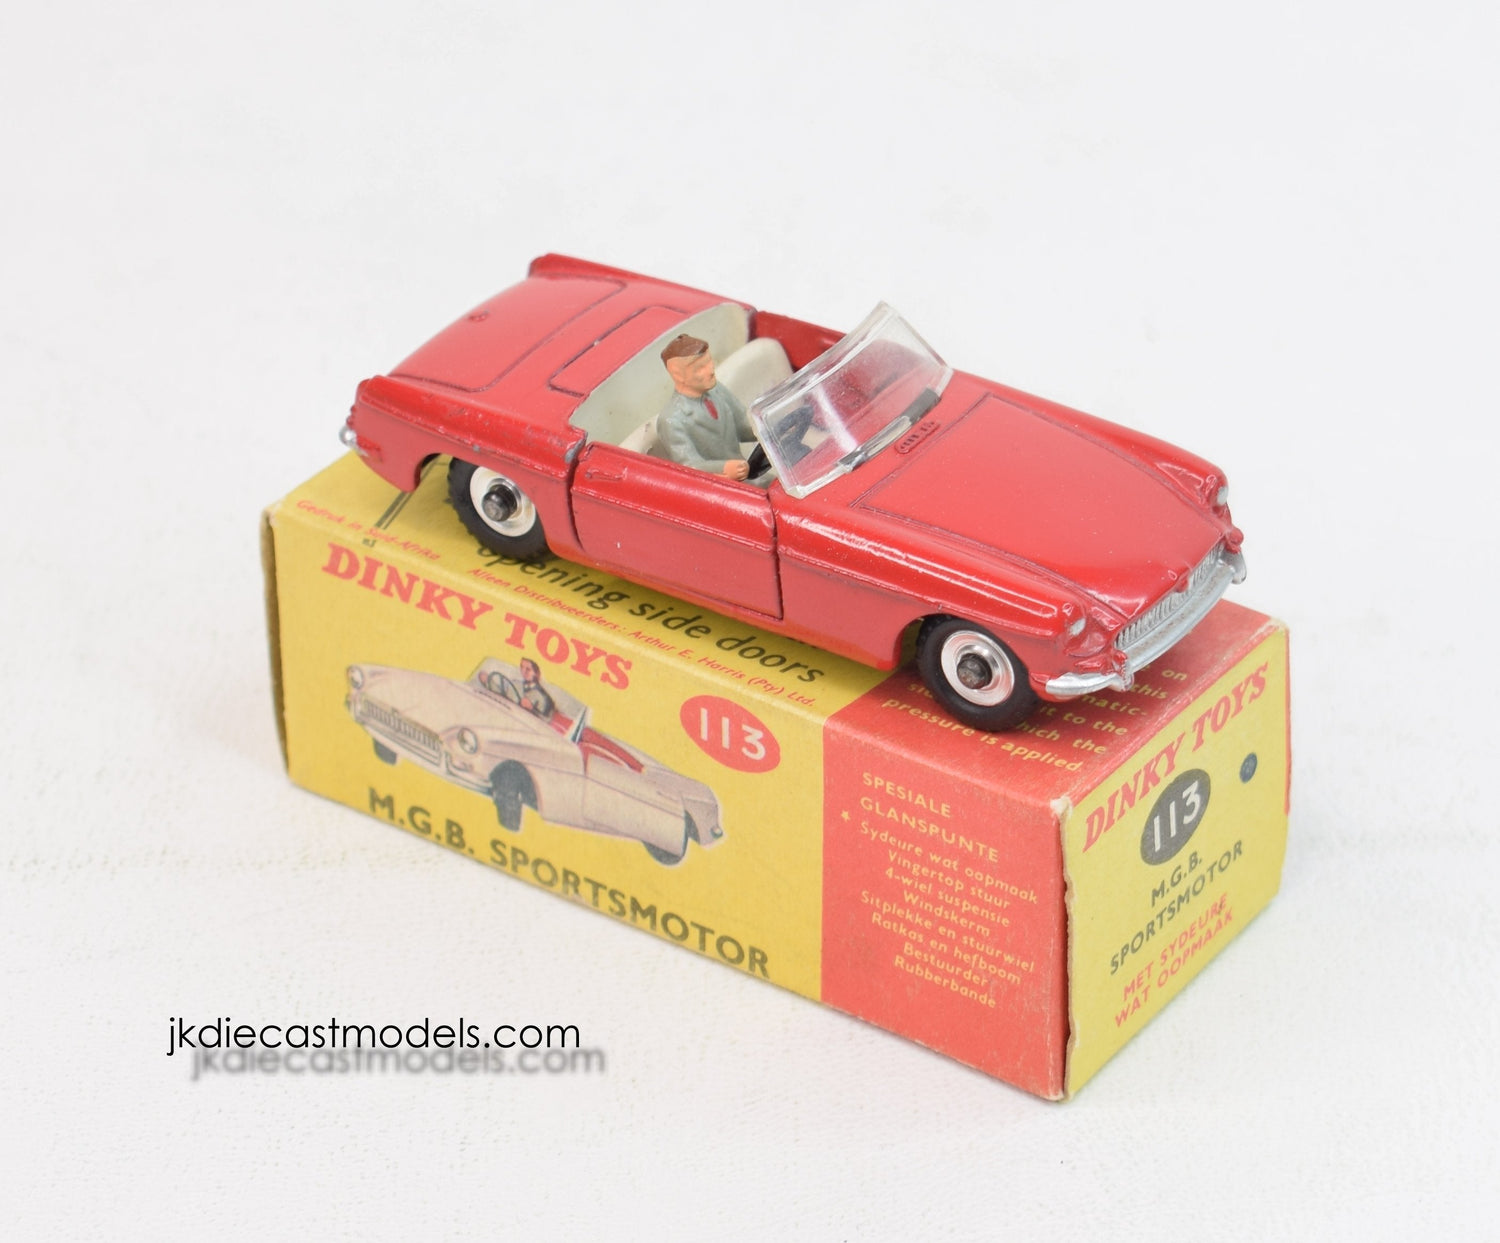 Dinky Toys 113 M.G.B Sportsmotor 'South African' Very Near Mint/Boxed